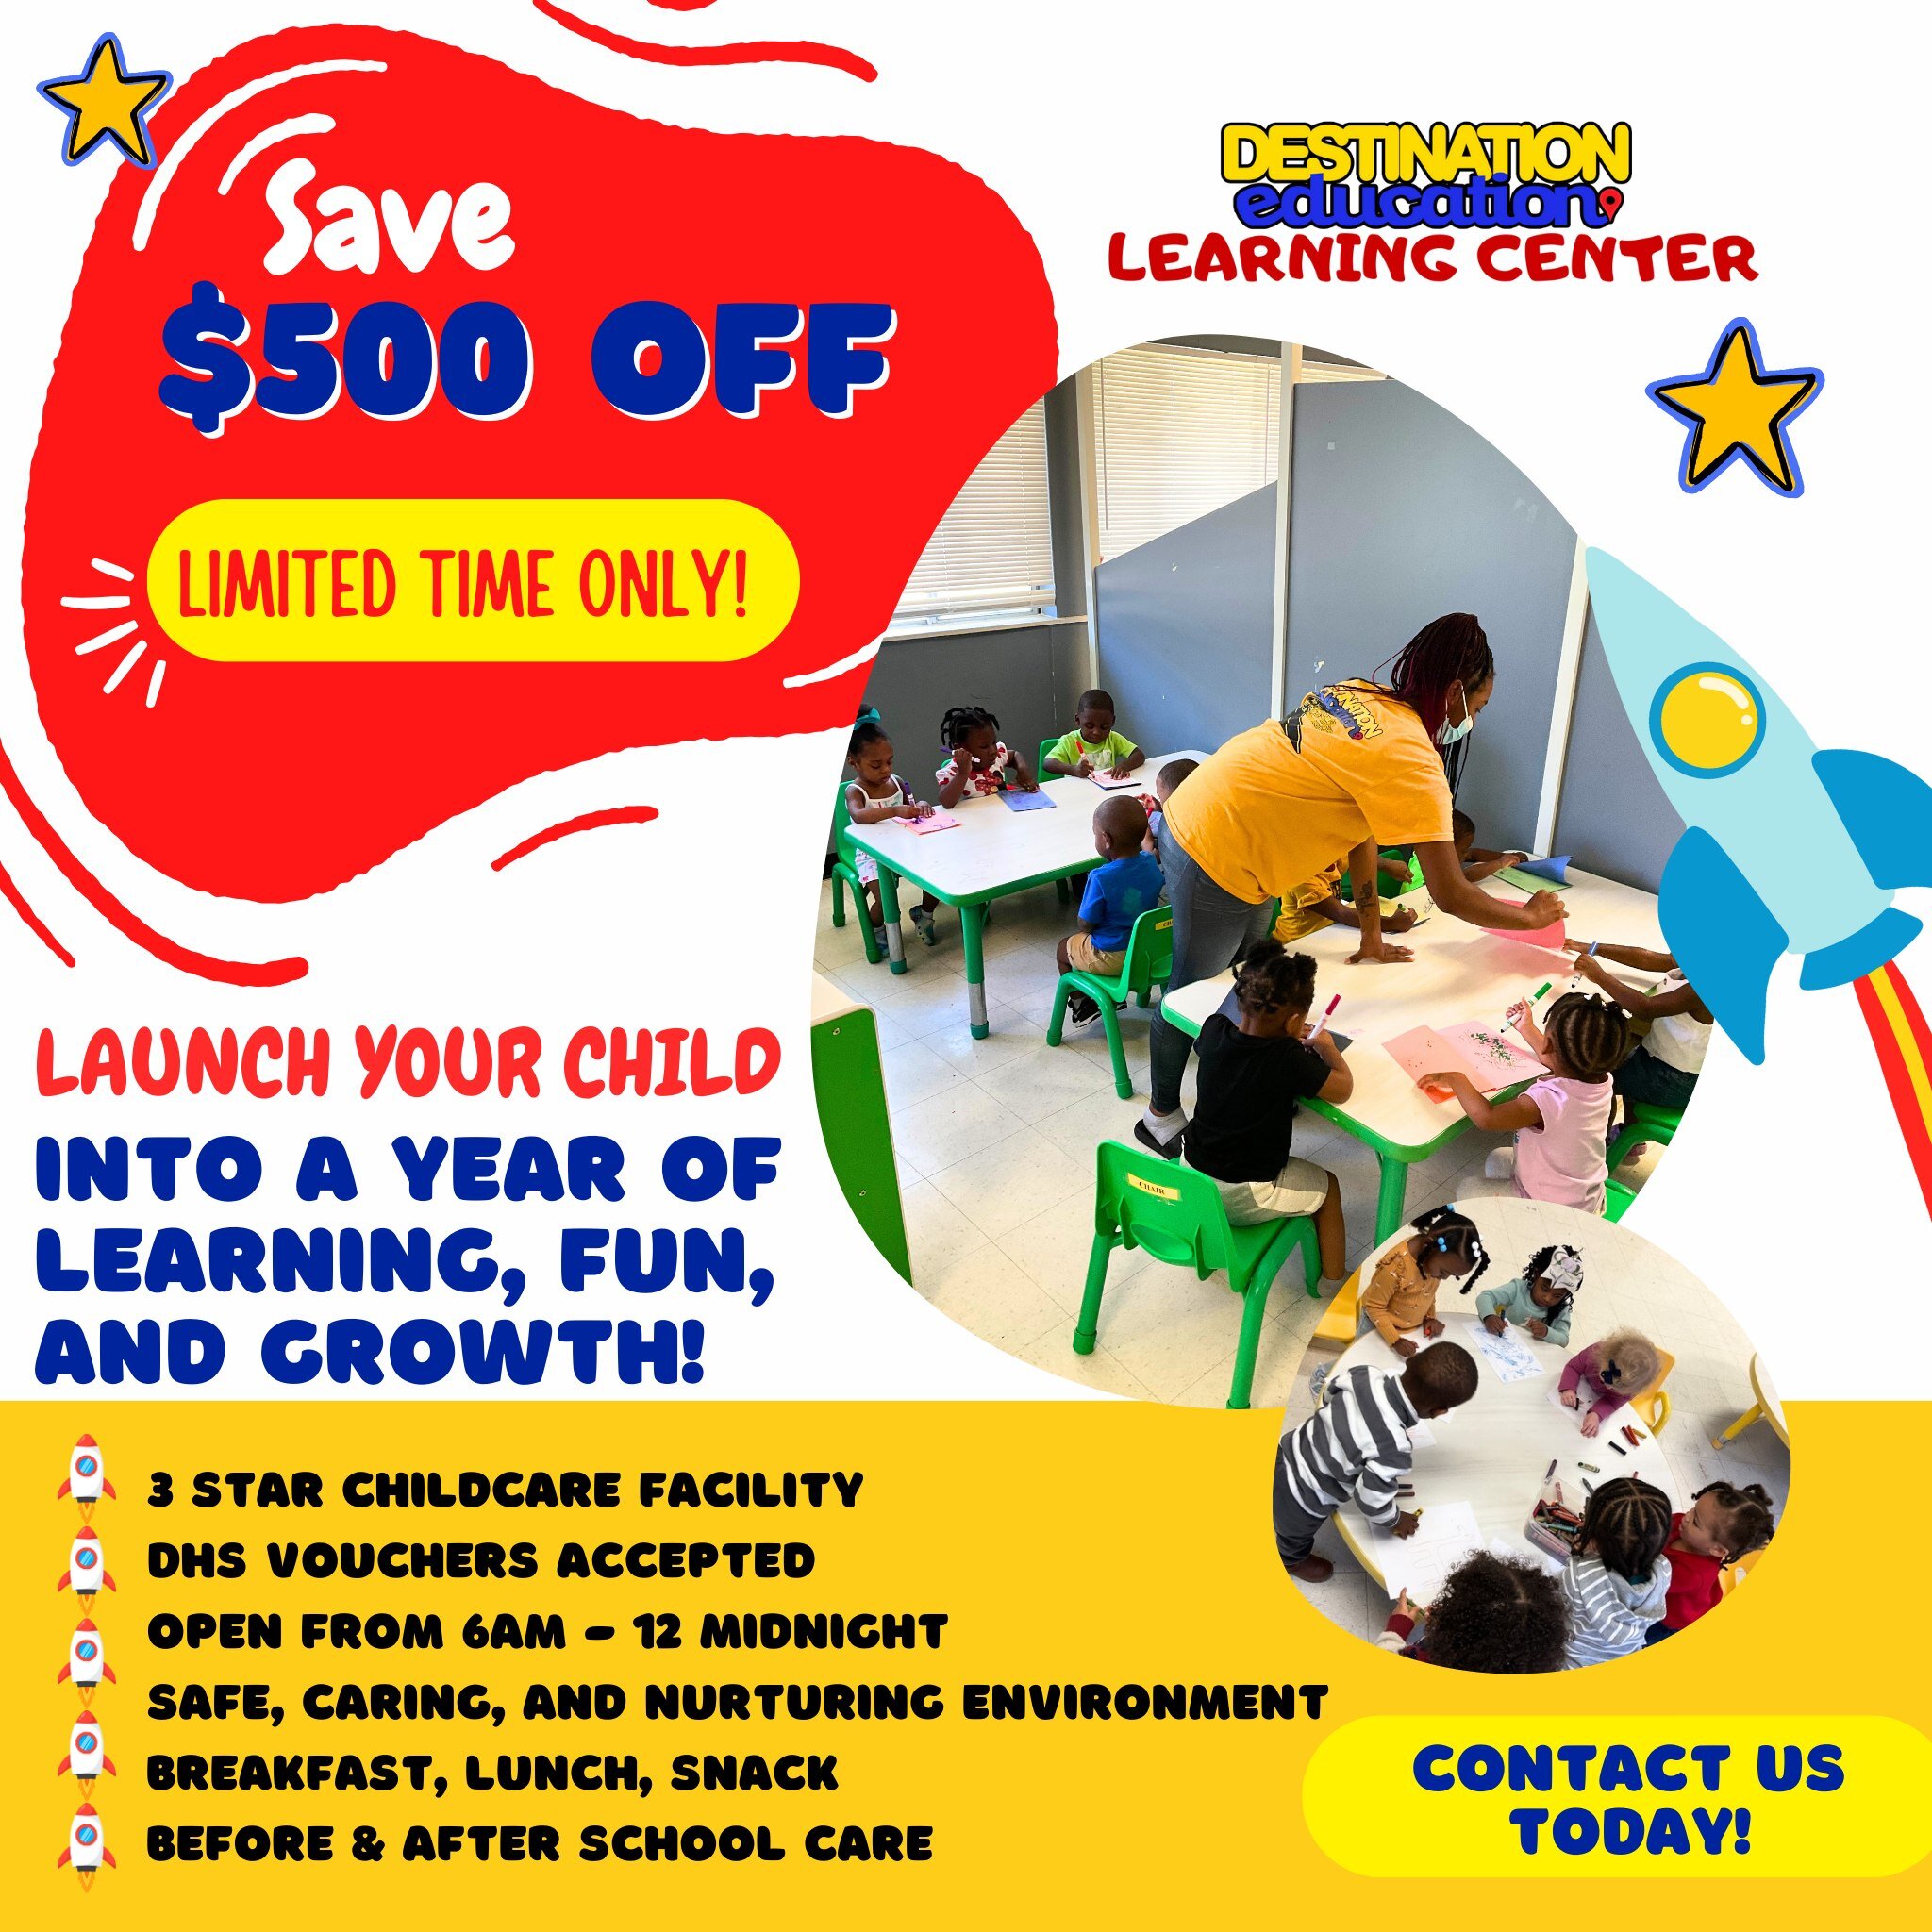 🚀 Launch your child into learning, fun, and growth this year! ✨ 
.
For a limited time, we're offering an exclusive $500 OFF enrollment! 🎉 Secure your child's spot today! 
.
Act fast, this offer won't last! Contact us today! 📞
.
.
.
#memphischildca